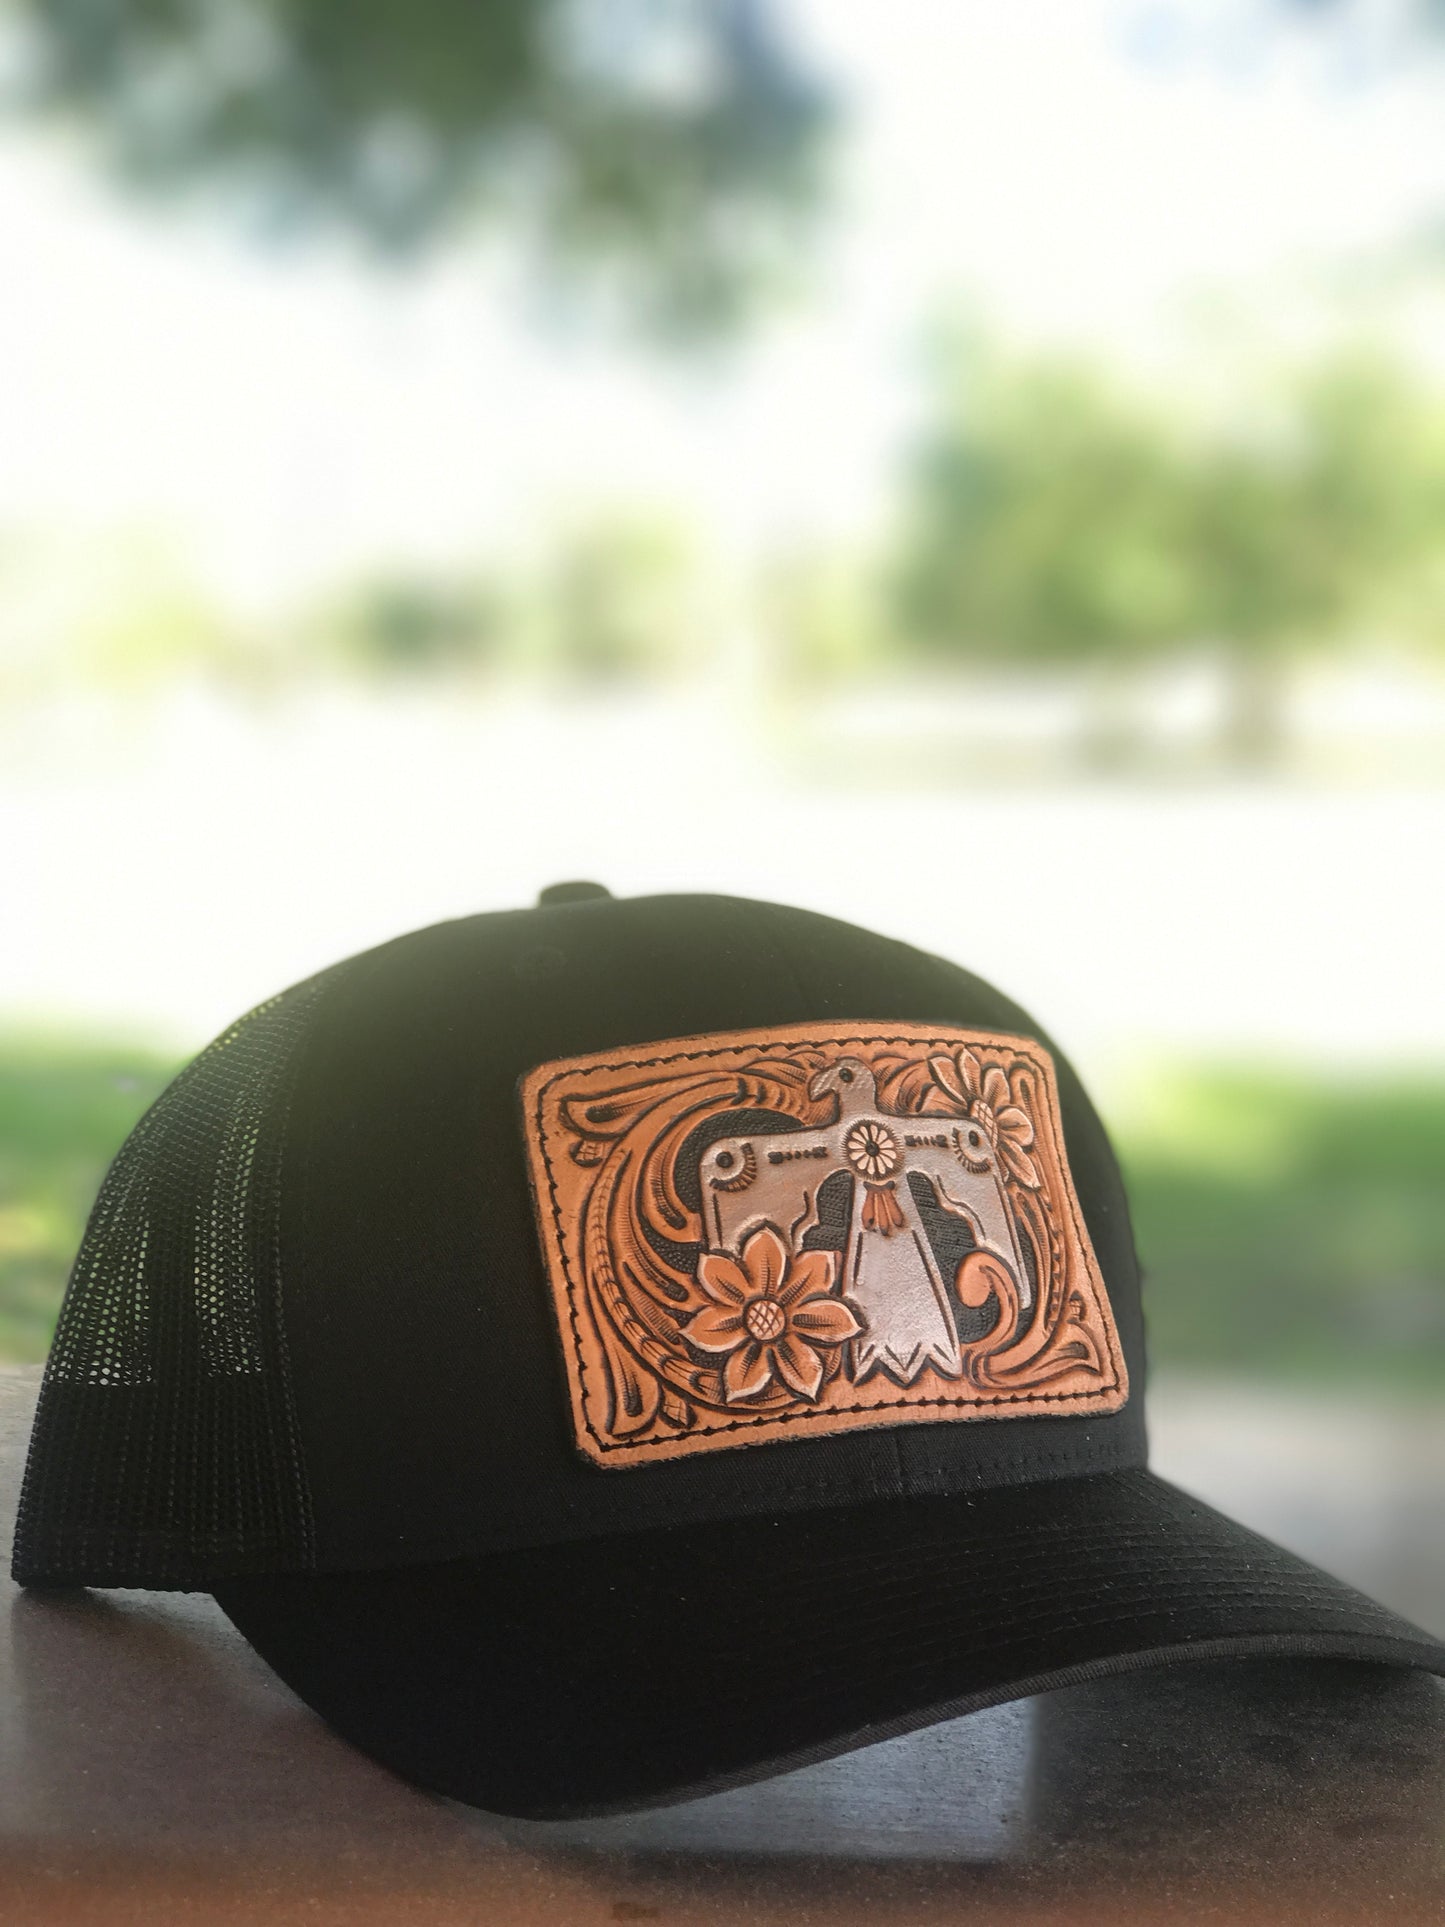 CUSTOM tooled hat patch. MADE RO ORDER